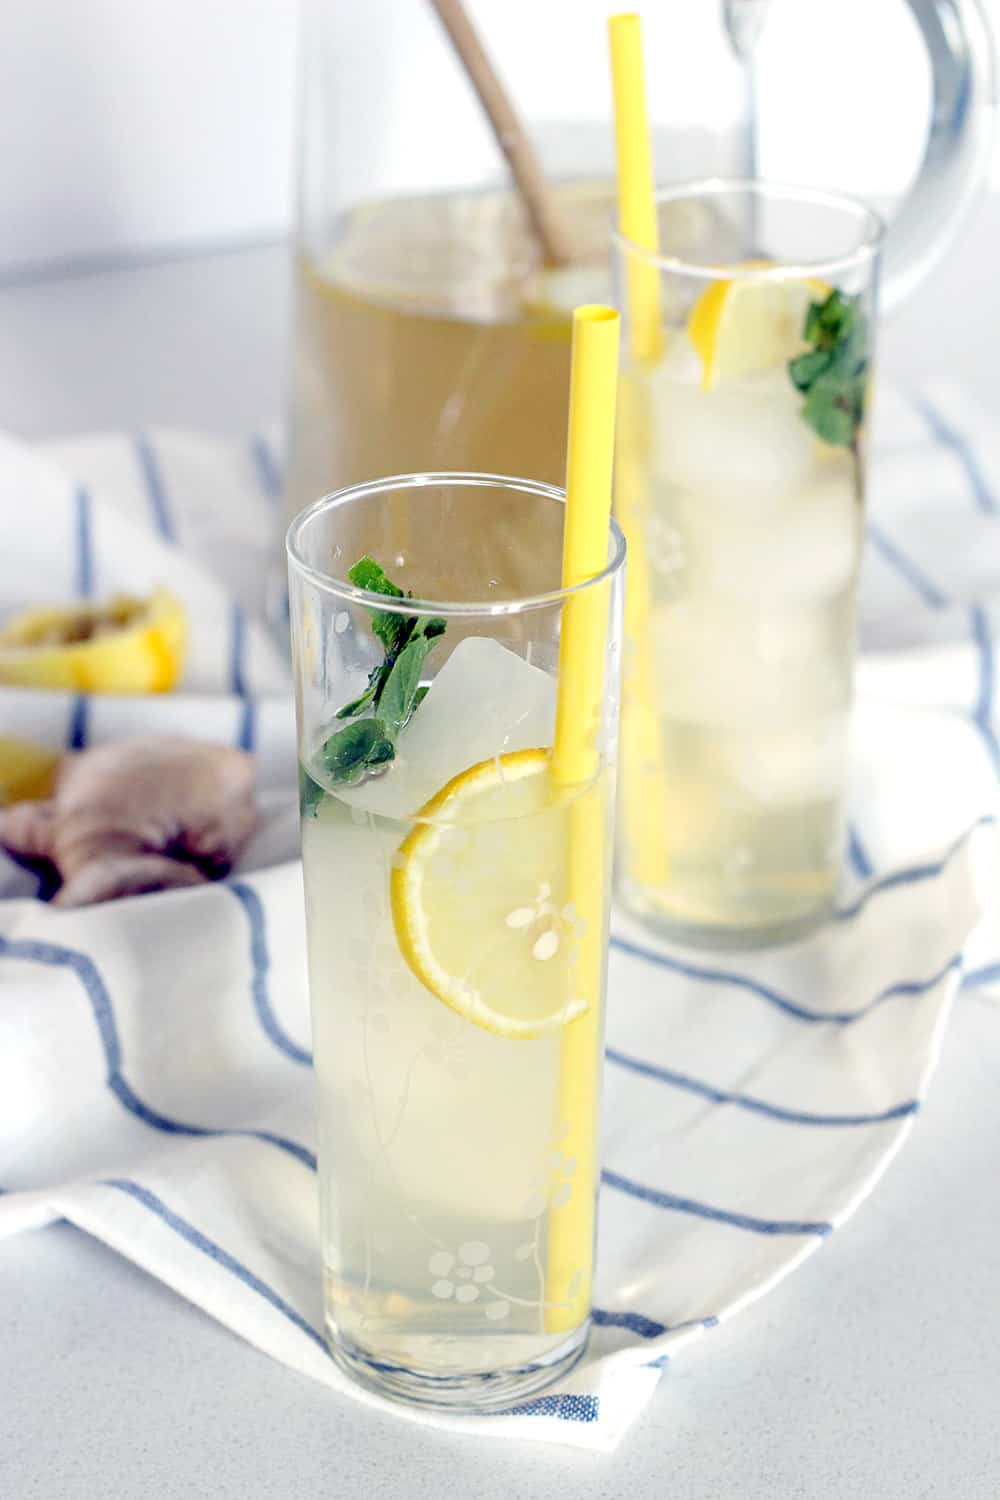 This iced ginger honey lemon tea is super healthy, delicious, and refreshing. Ginger, honey, and lemon all have medicinal qualities- it's great for a queasy stomach, better digestion, or just for a healthy sweet delicious treat!